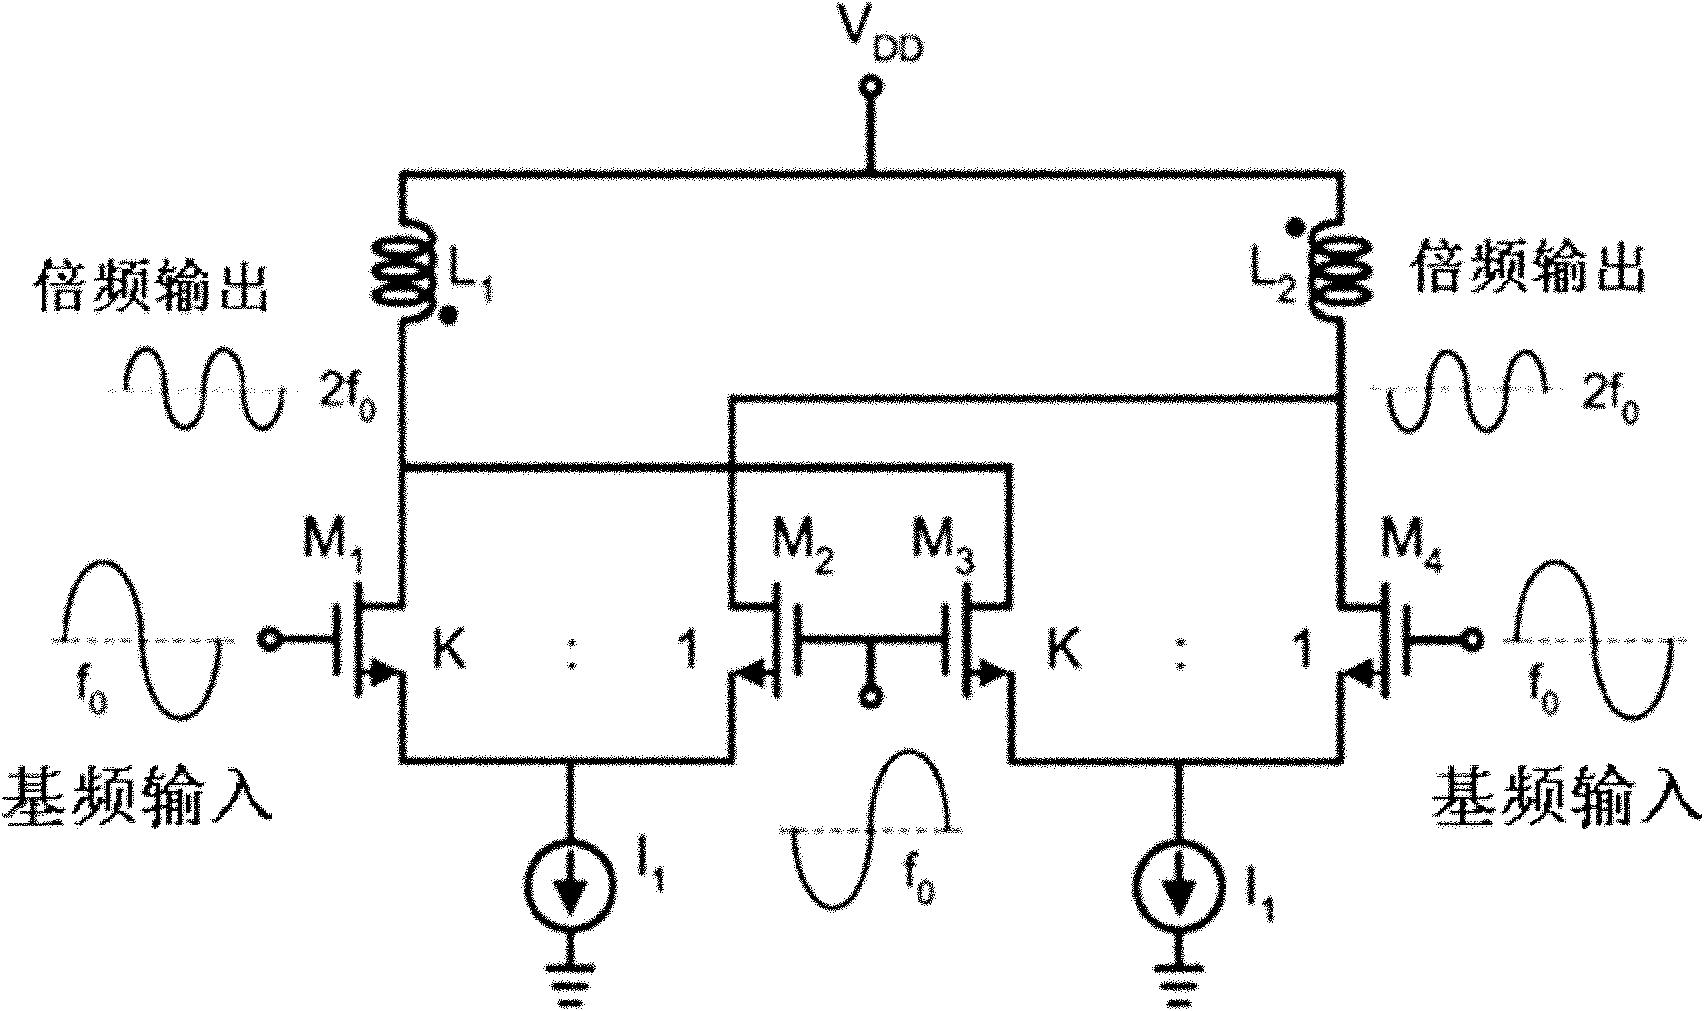 Millimeter-wave frequency multiplier and cascaded frequency multipliers